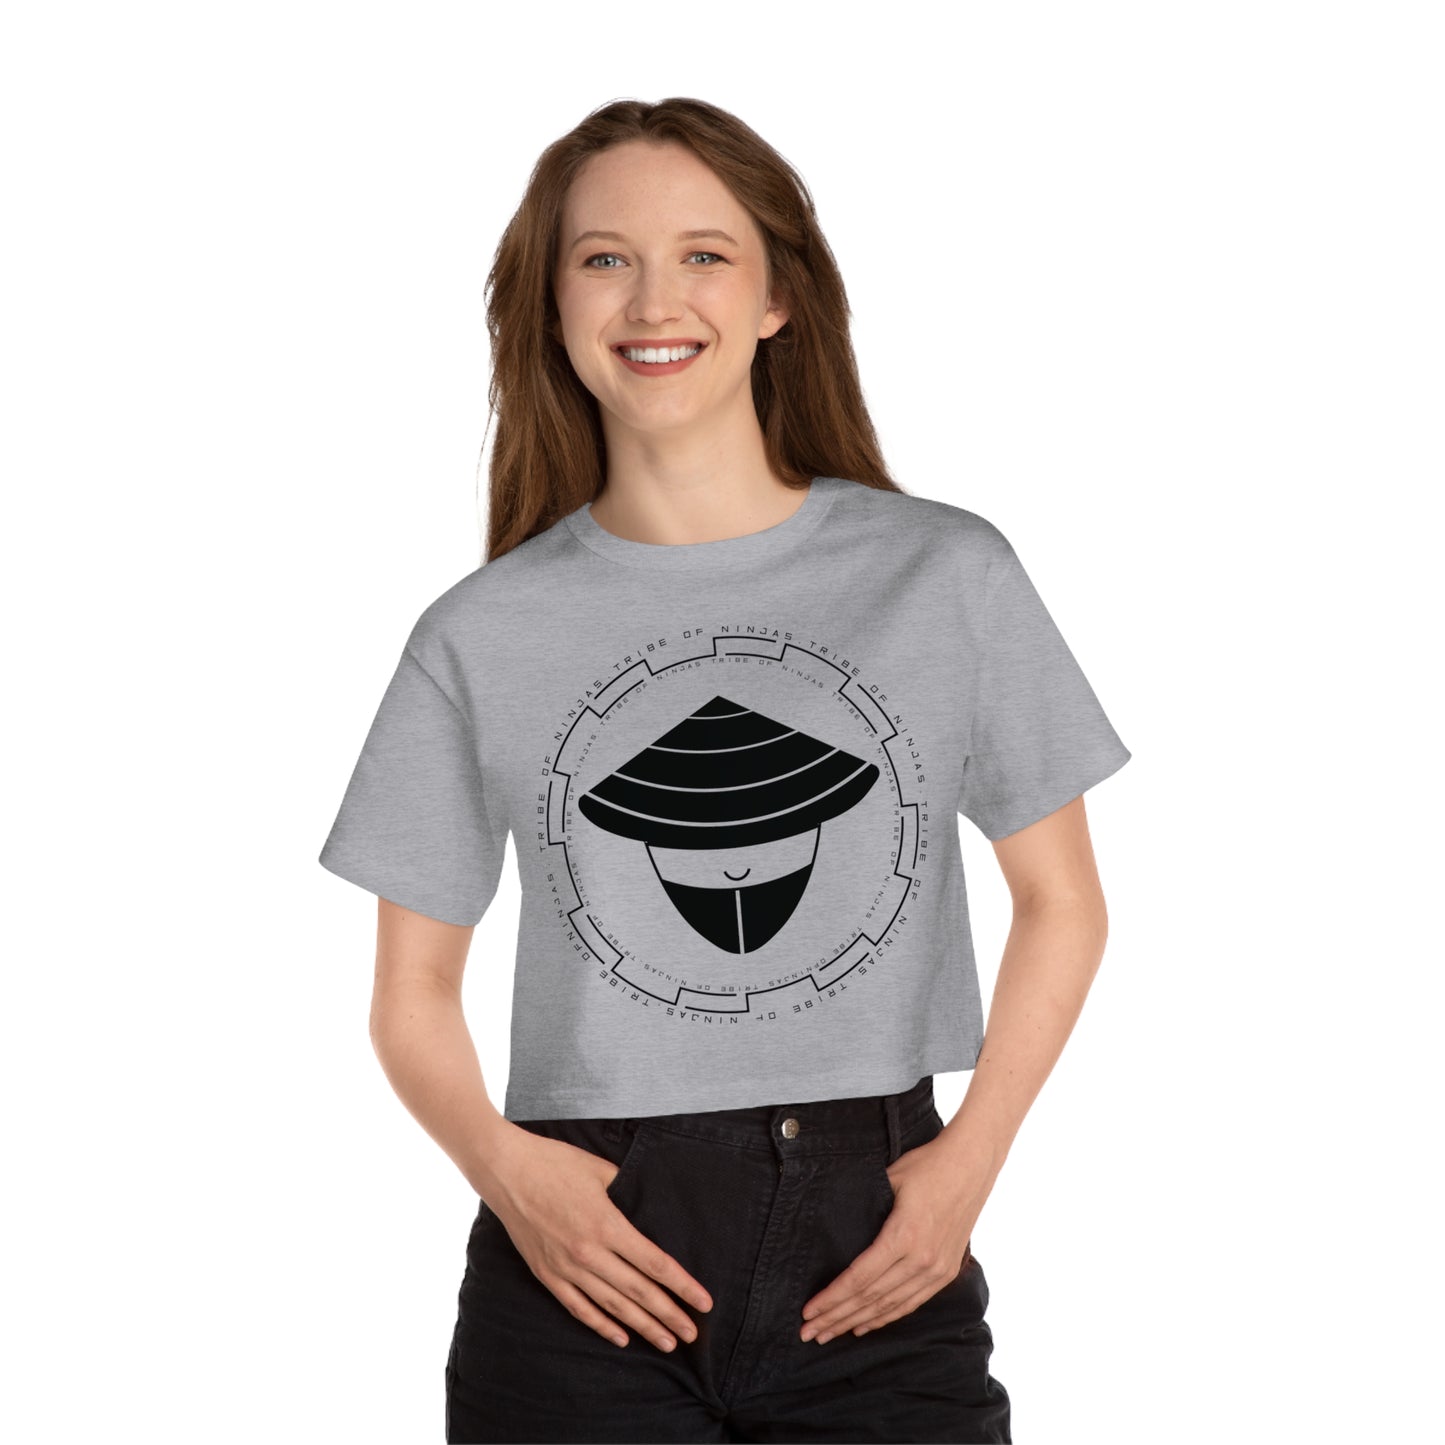 Women's Heritage Cropped T-Shirt